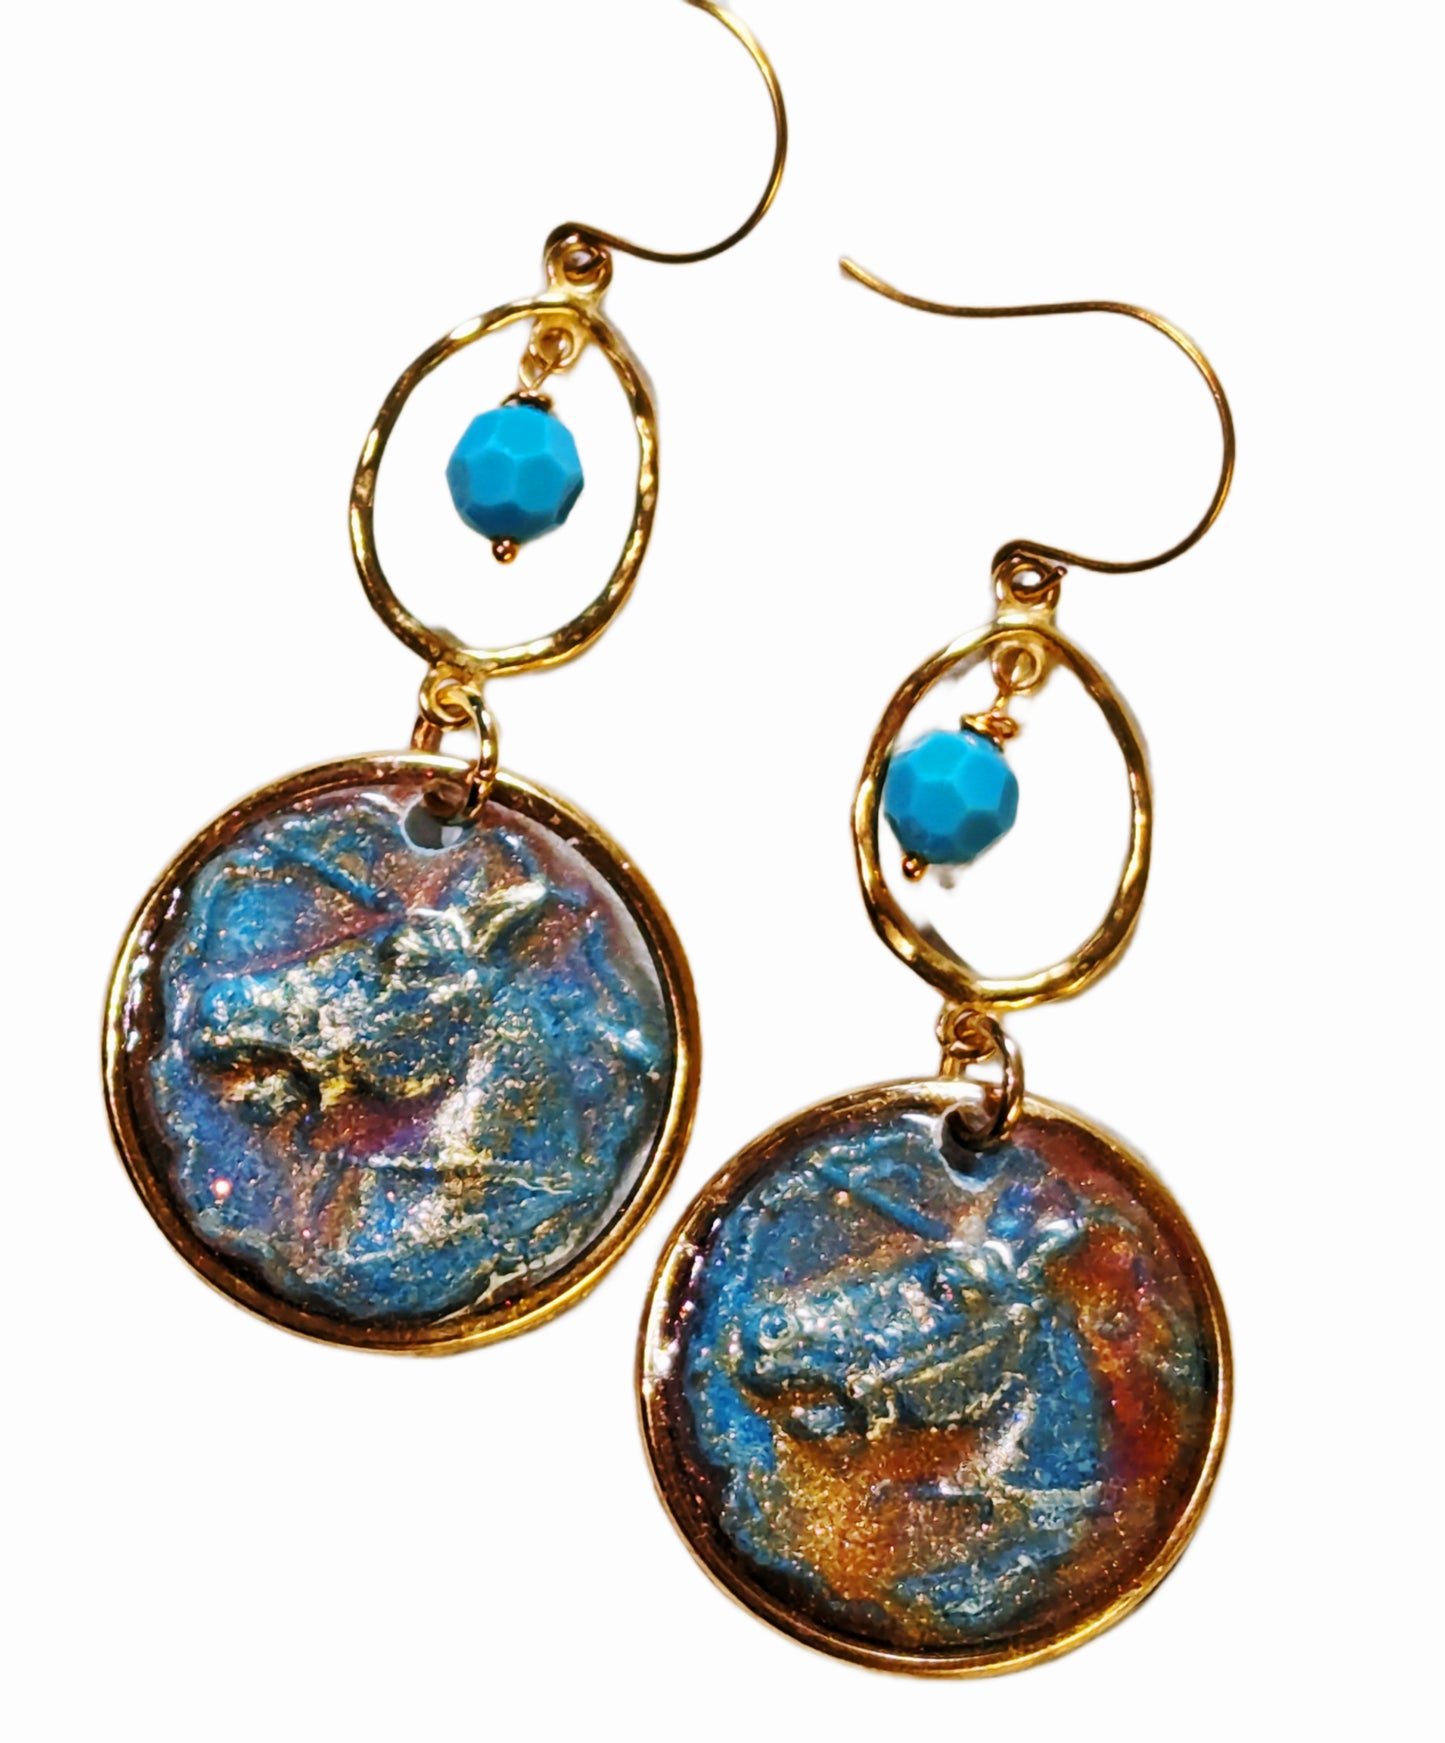 Swarovski Turquoise + Highly Detailed Blue Gold Resin Horse Earrings 3.1 inches USA Made by Designer Sugar Gay Isber unisex-adult